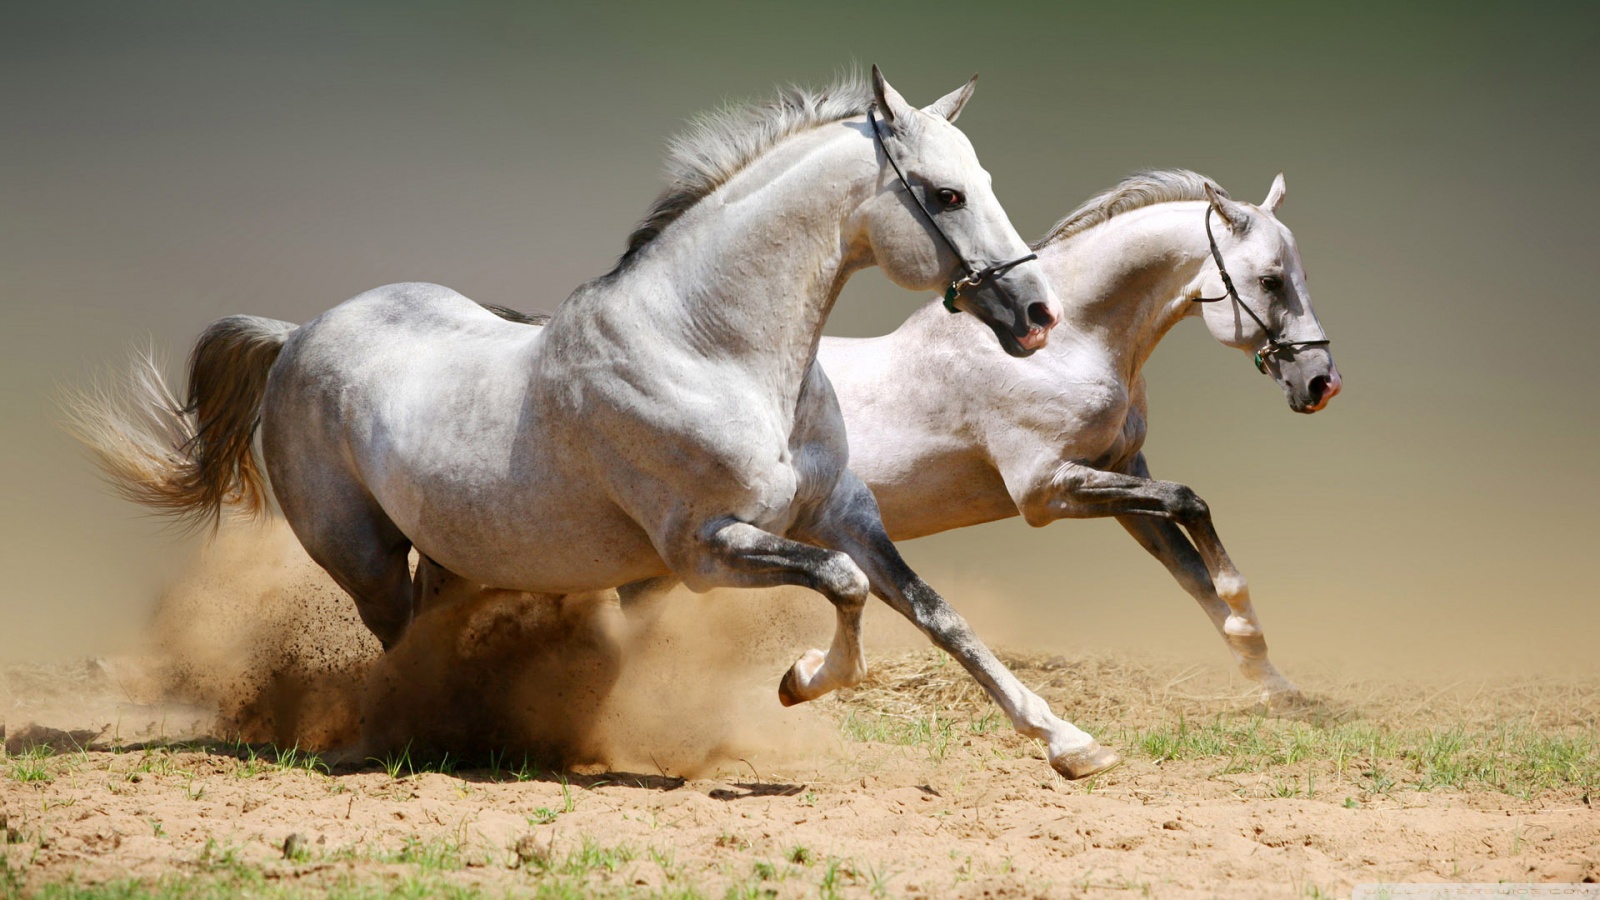 HD wallpaper race speed horse animal rodeo gallop equine horses  equestrian  Wallpaper Flare